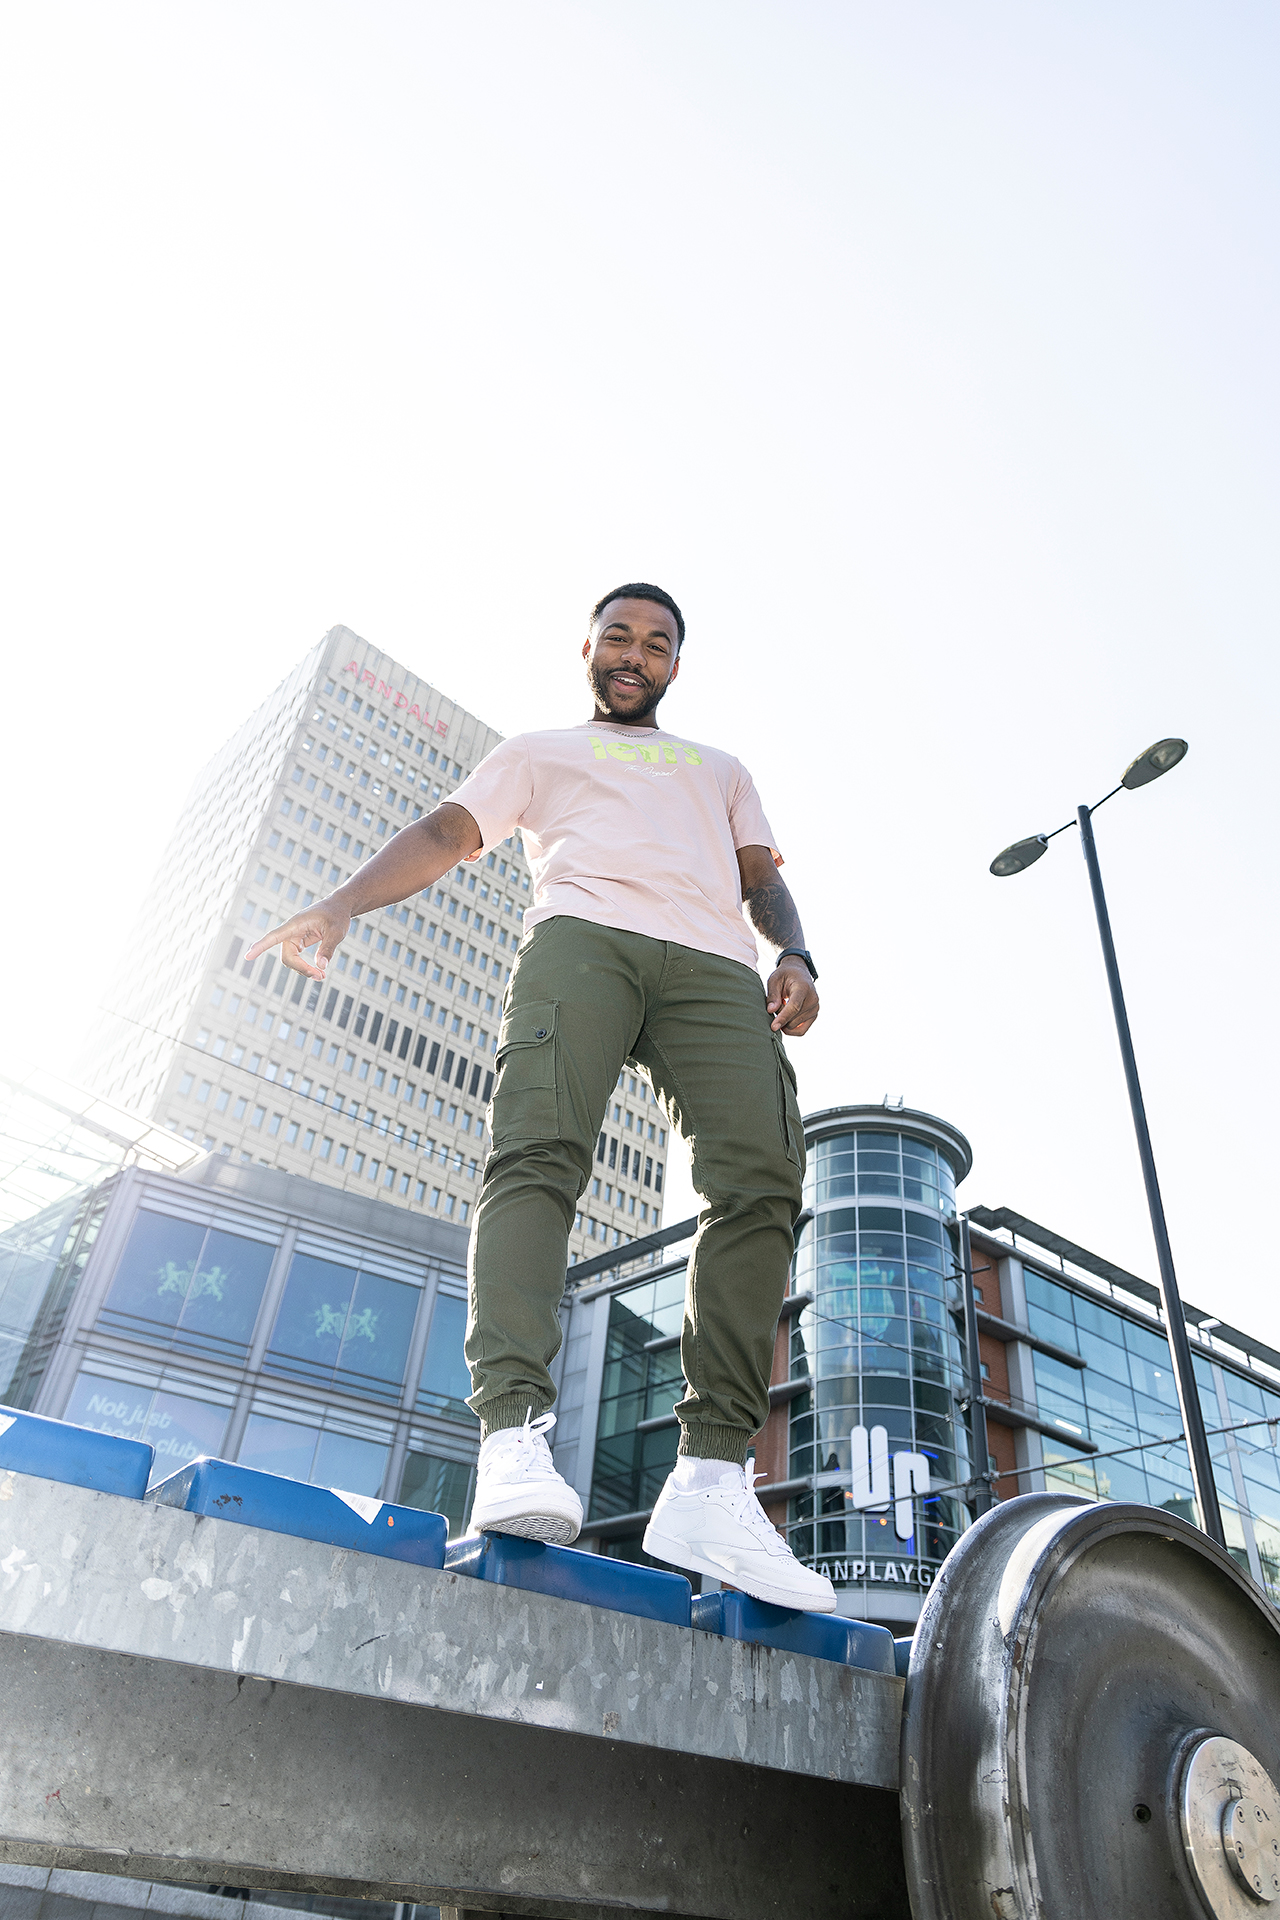 menswear fashion photography on location for Manchester Arndale